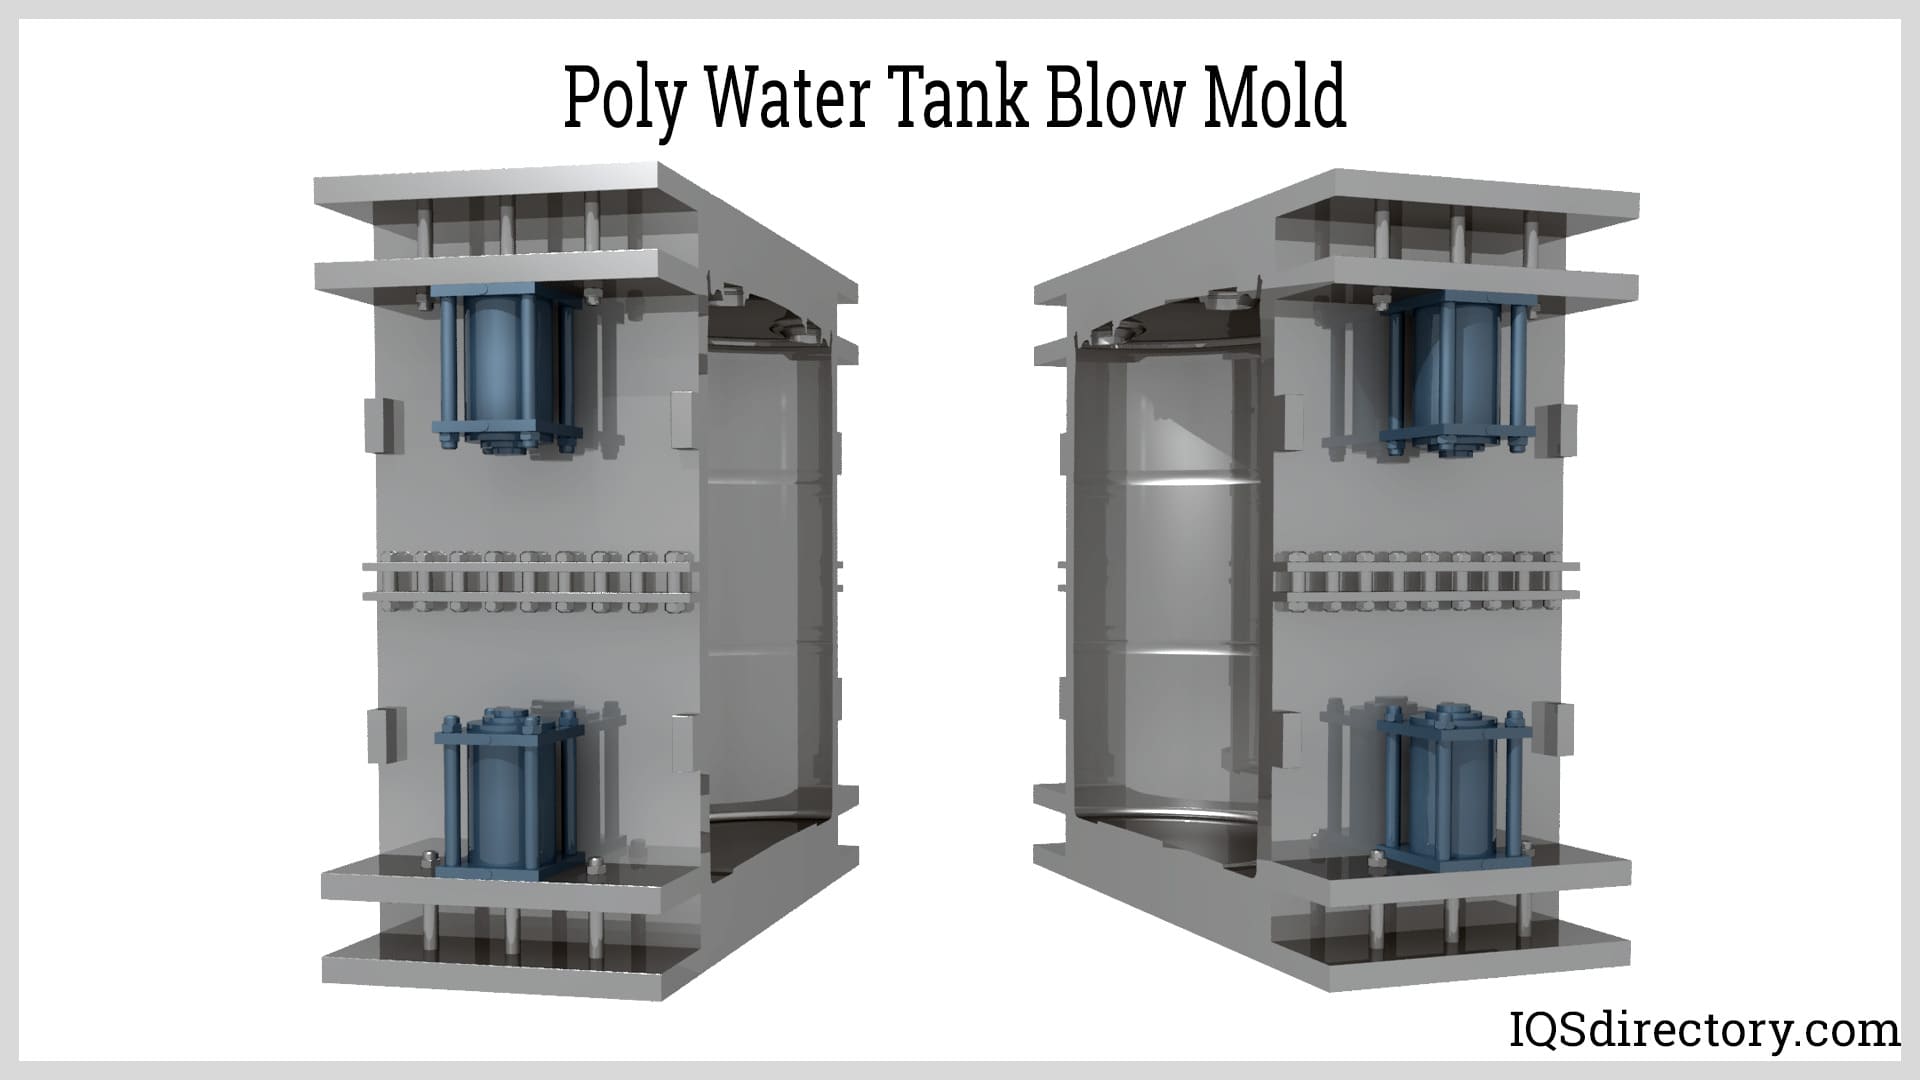 Poly Water Tank Blow Mold